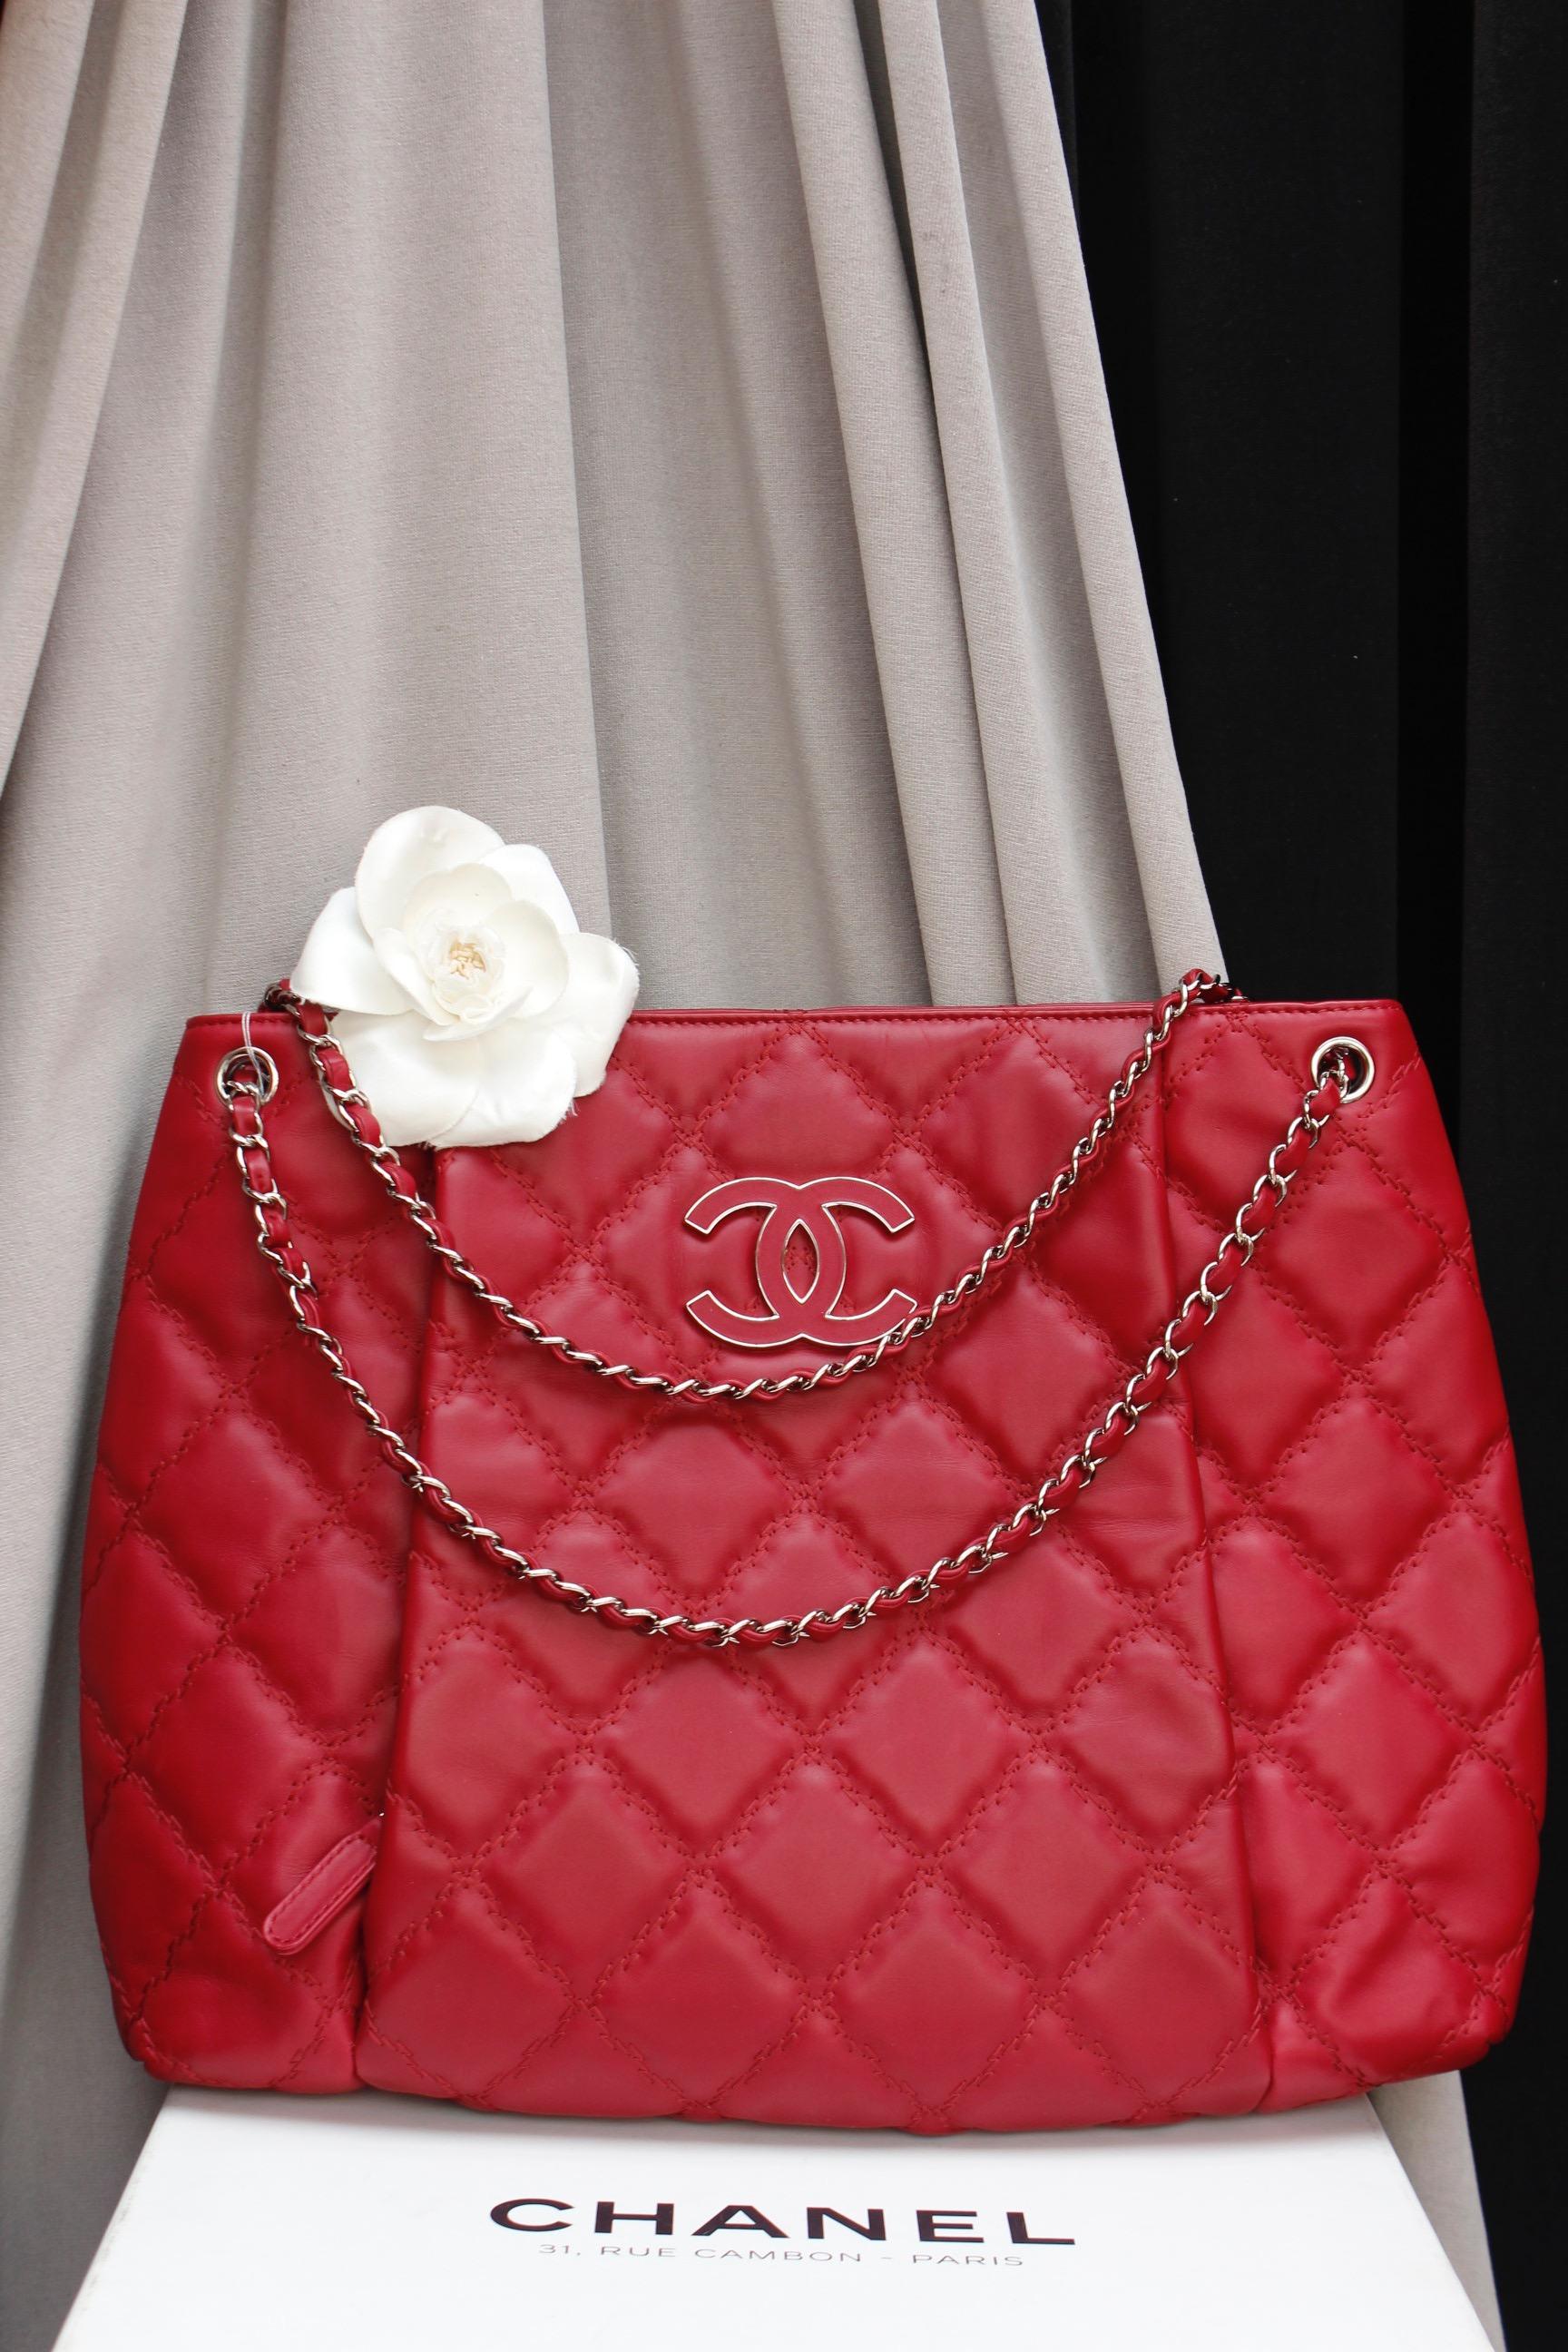 CHANEL (Made in France) Wide tote bag composed of cherry red quilted leather with rounded edges. The front features a zipped pocket decorated with a silver plated and tonal leather CC logo. The silver plated handle is entwined with red leather.

The